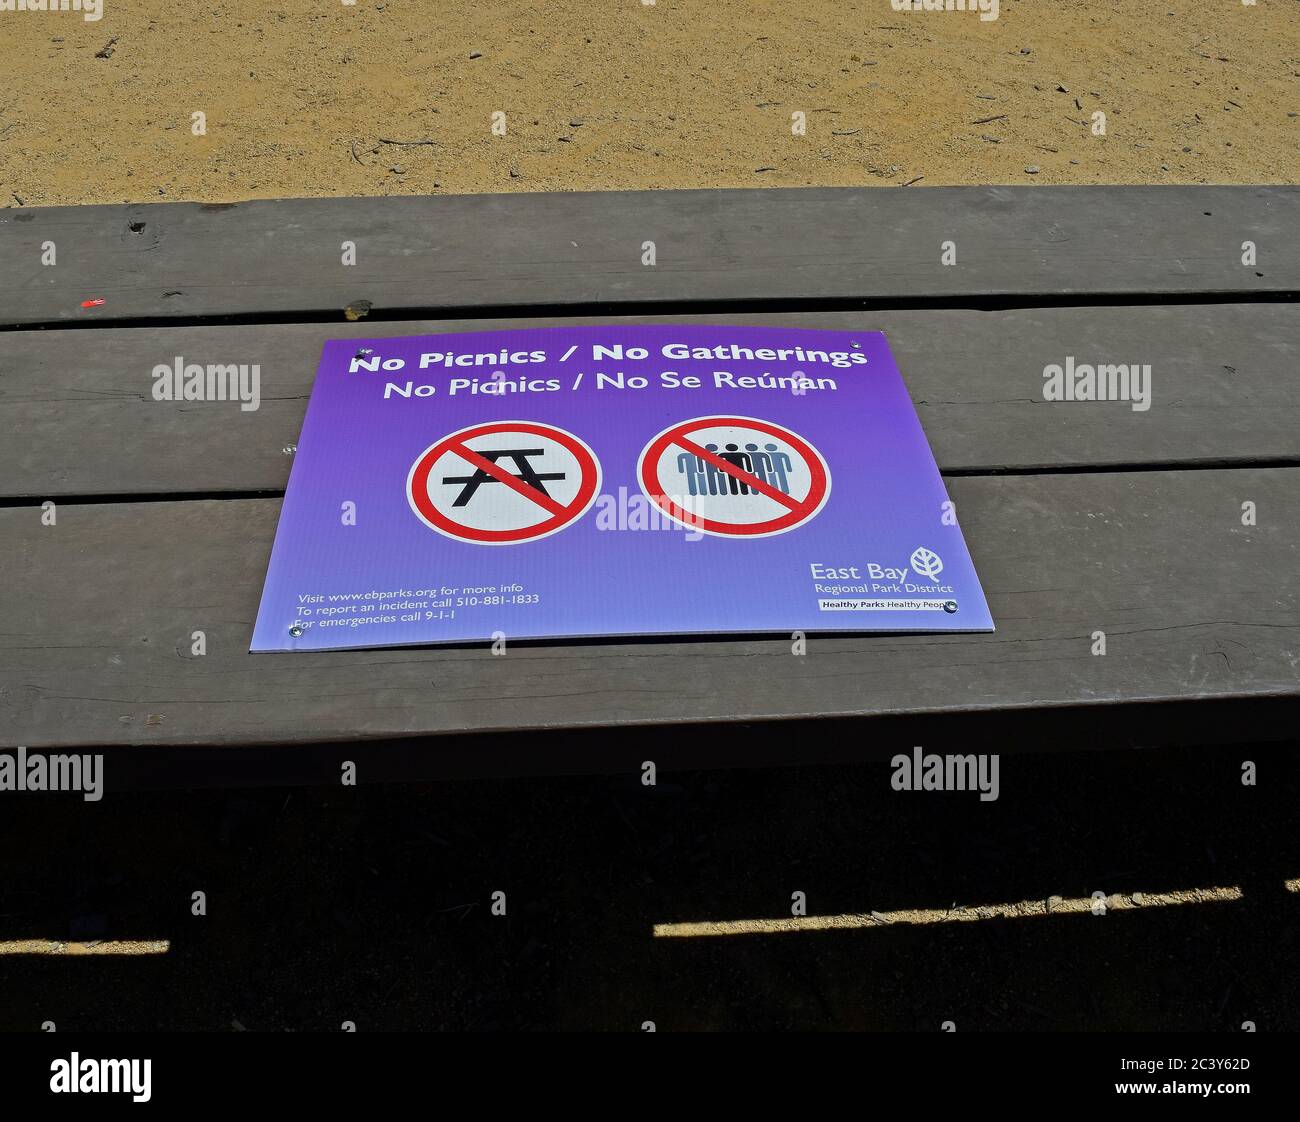 covid-19 virus pandemic sign on a picnic table prohibiting picnics and gatherings at the Alameda Creek Trail Stables Staging Area, California Stock Photo